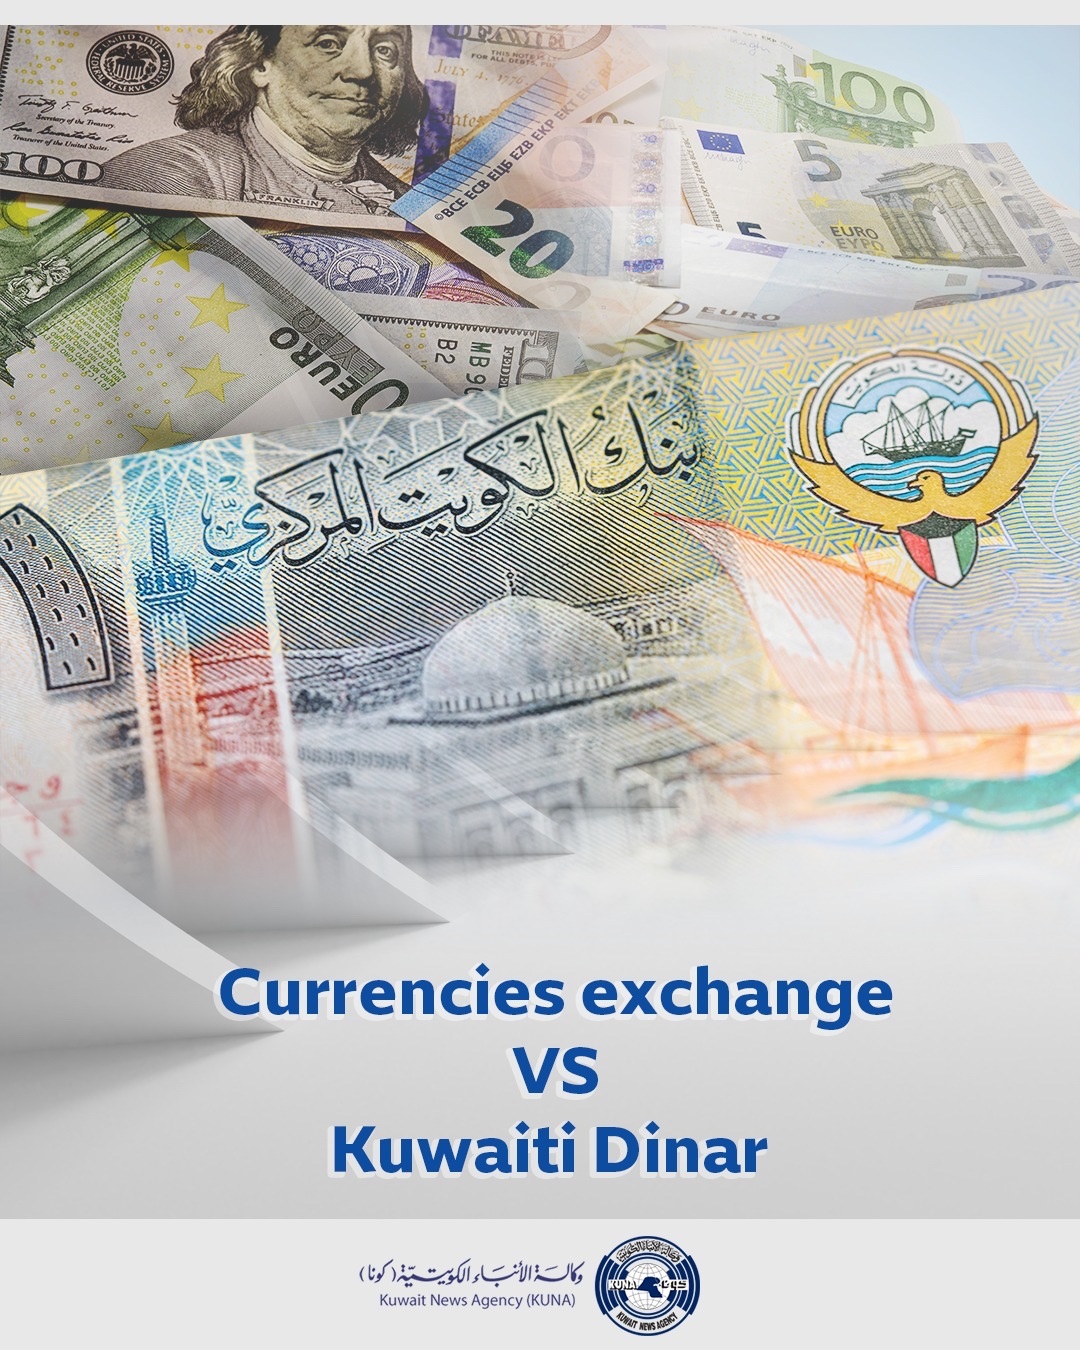 US Dollar stable at KD 0.307, EUR rises to KD 0.332                                                                                                                                                                                                       